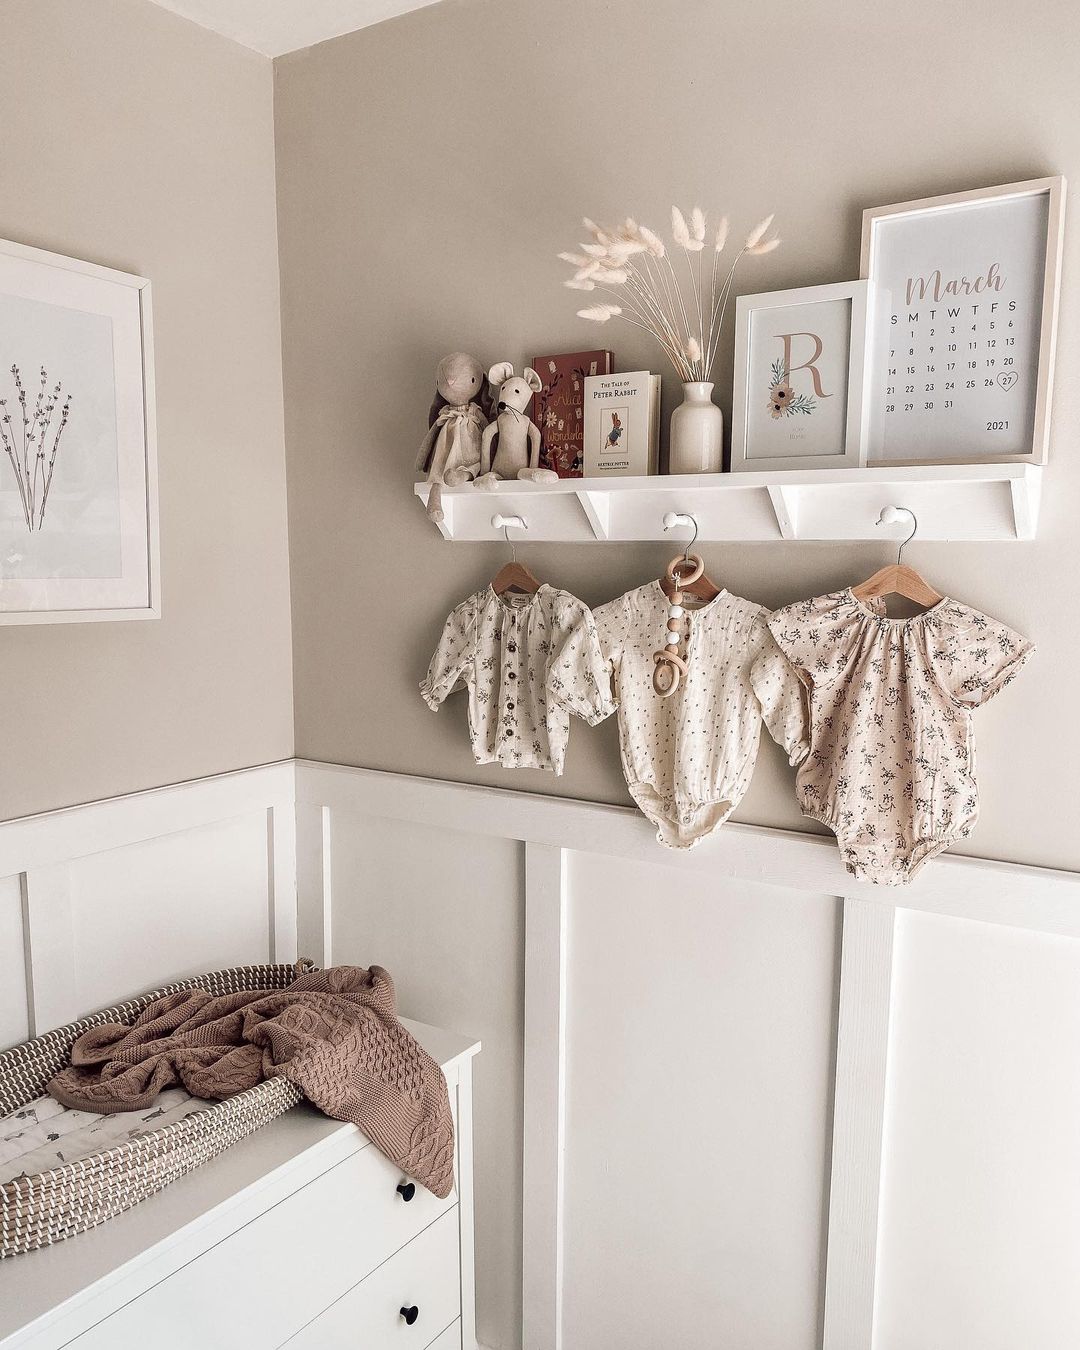 Baby room shelf with clothing storage and decor. Photo by Instagram user @hearthomeinterior